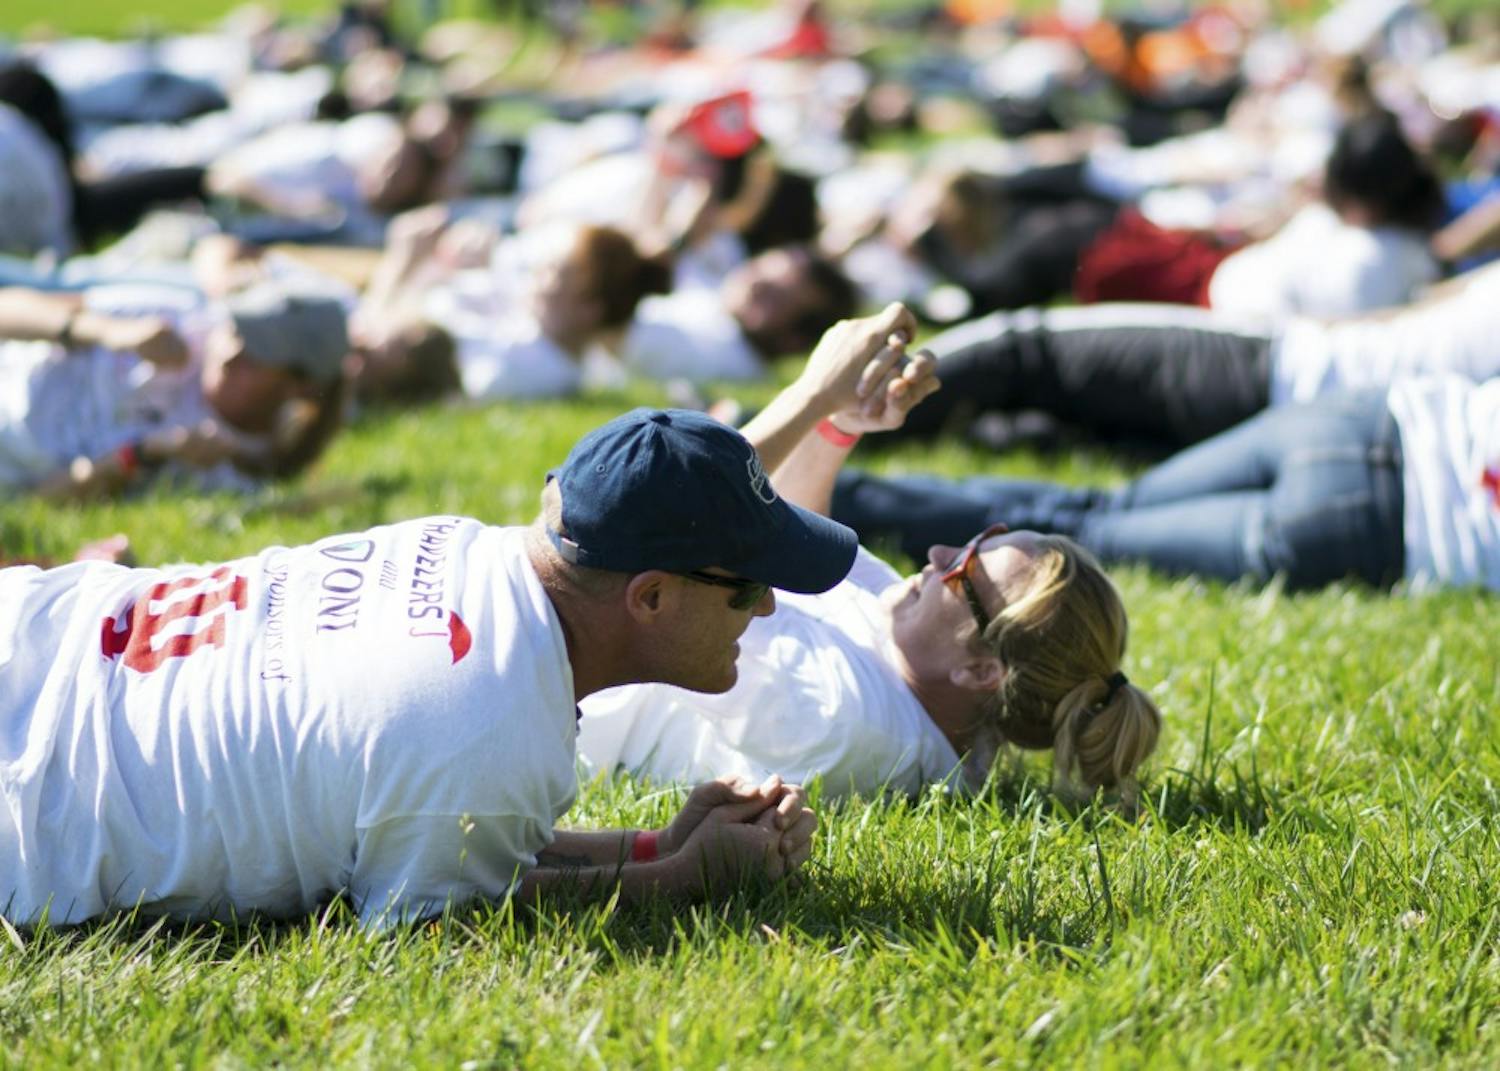 IU employees Herb Jones and April Purlee roll on the ground as part of the Office of Insurance, Loss Control &amp; Claims' organized attempt to break the current world record of 1,719 people simultaneously stop, drop and rolling. The Guinness World Records requires participants roll on the ground for 30 seconds in order for the attempt to count.&nbsp;